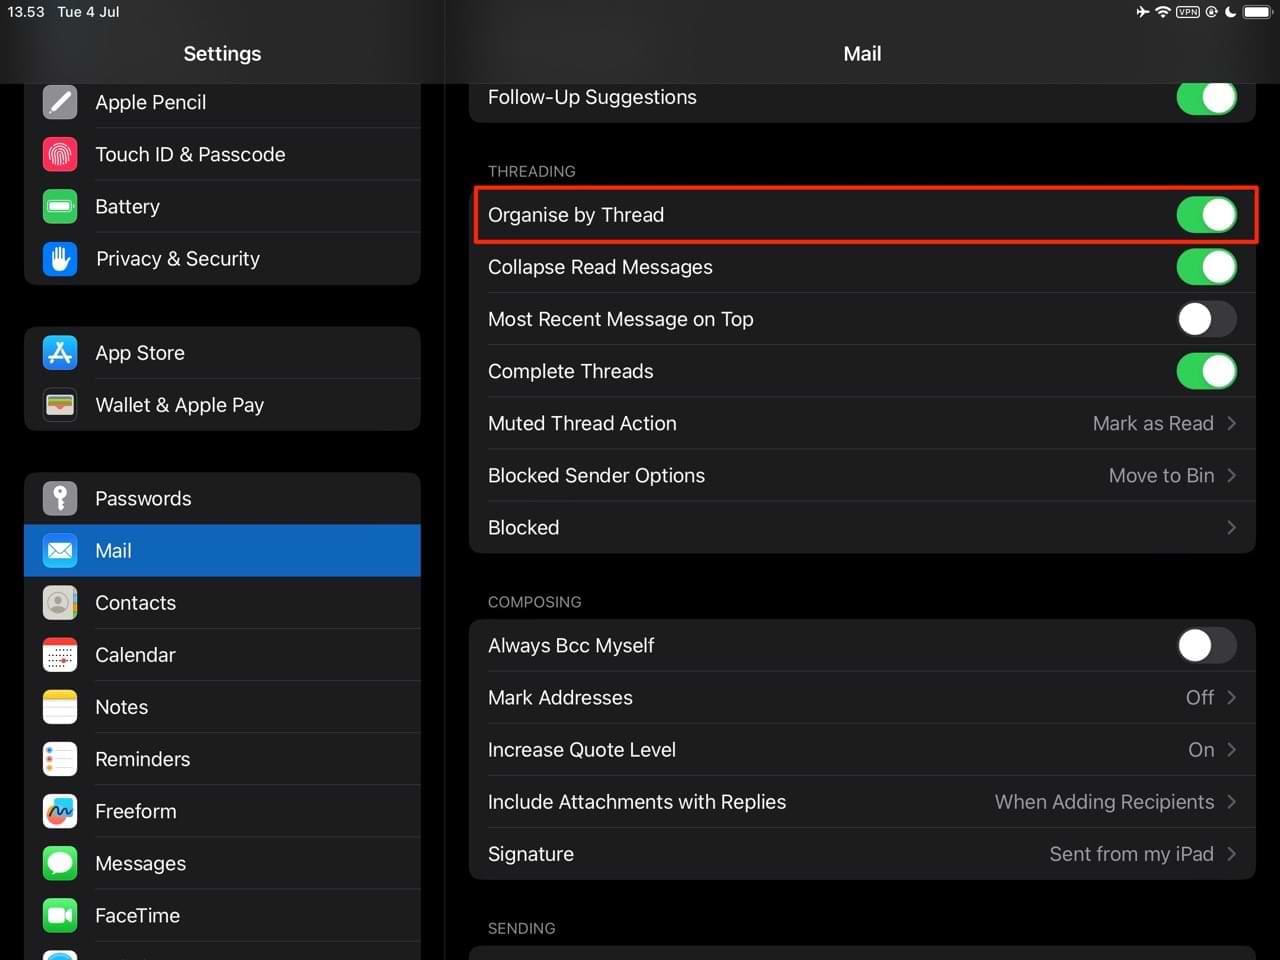 Switch off the Organized Threading option in the Settings app 